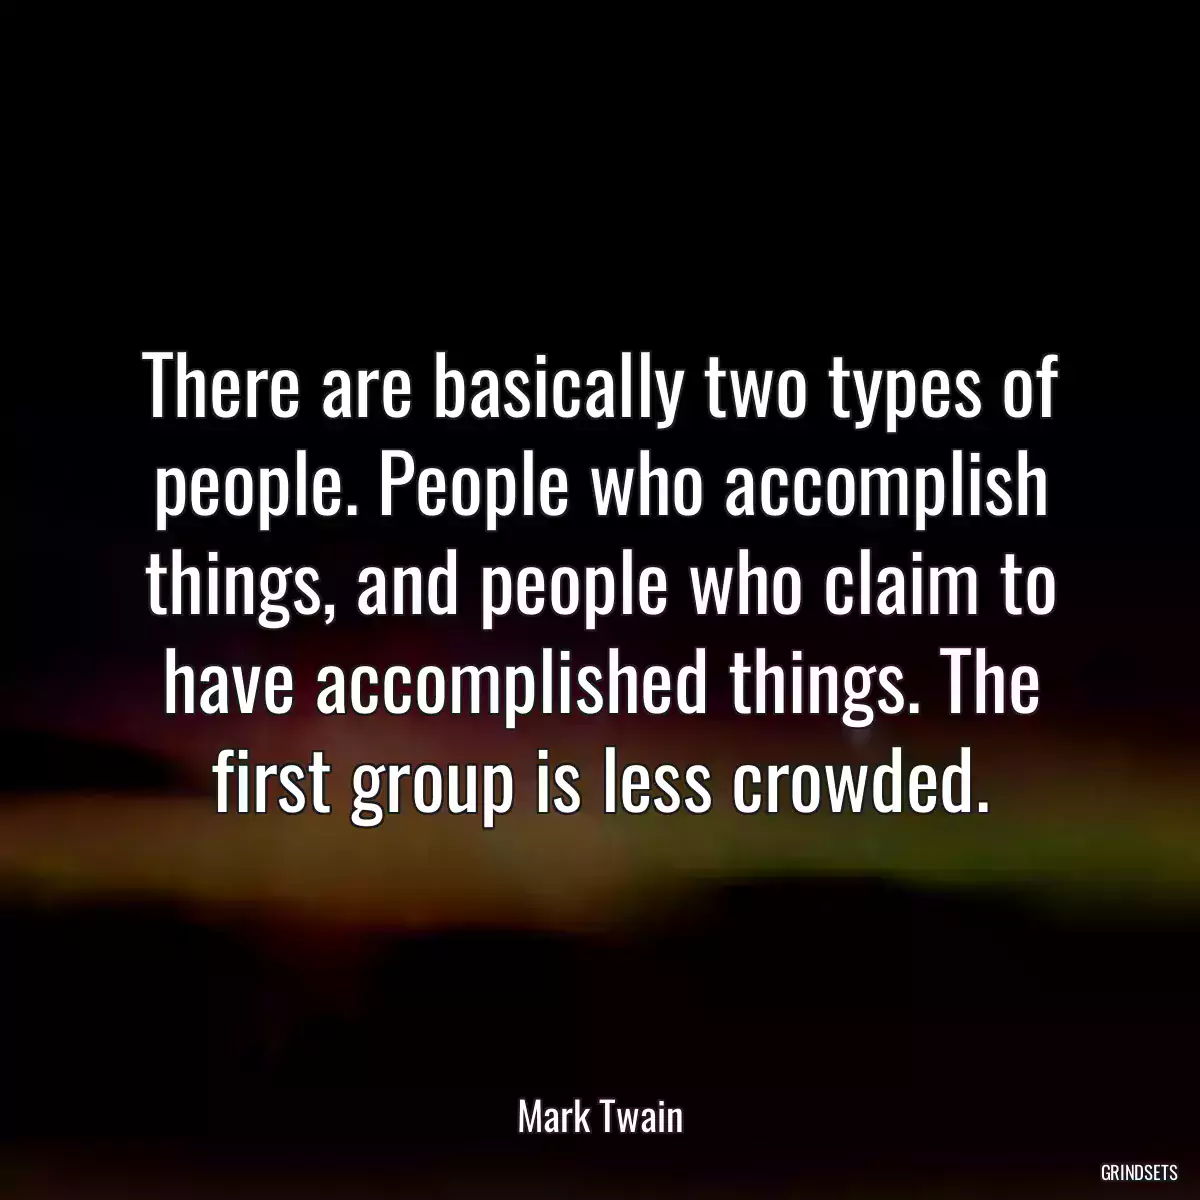 There are basically two types of people. People who accomplish things, and people who claim to have accomplished things. The first group is less crowded.